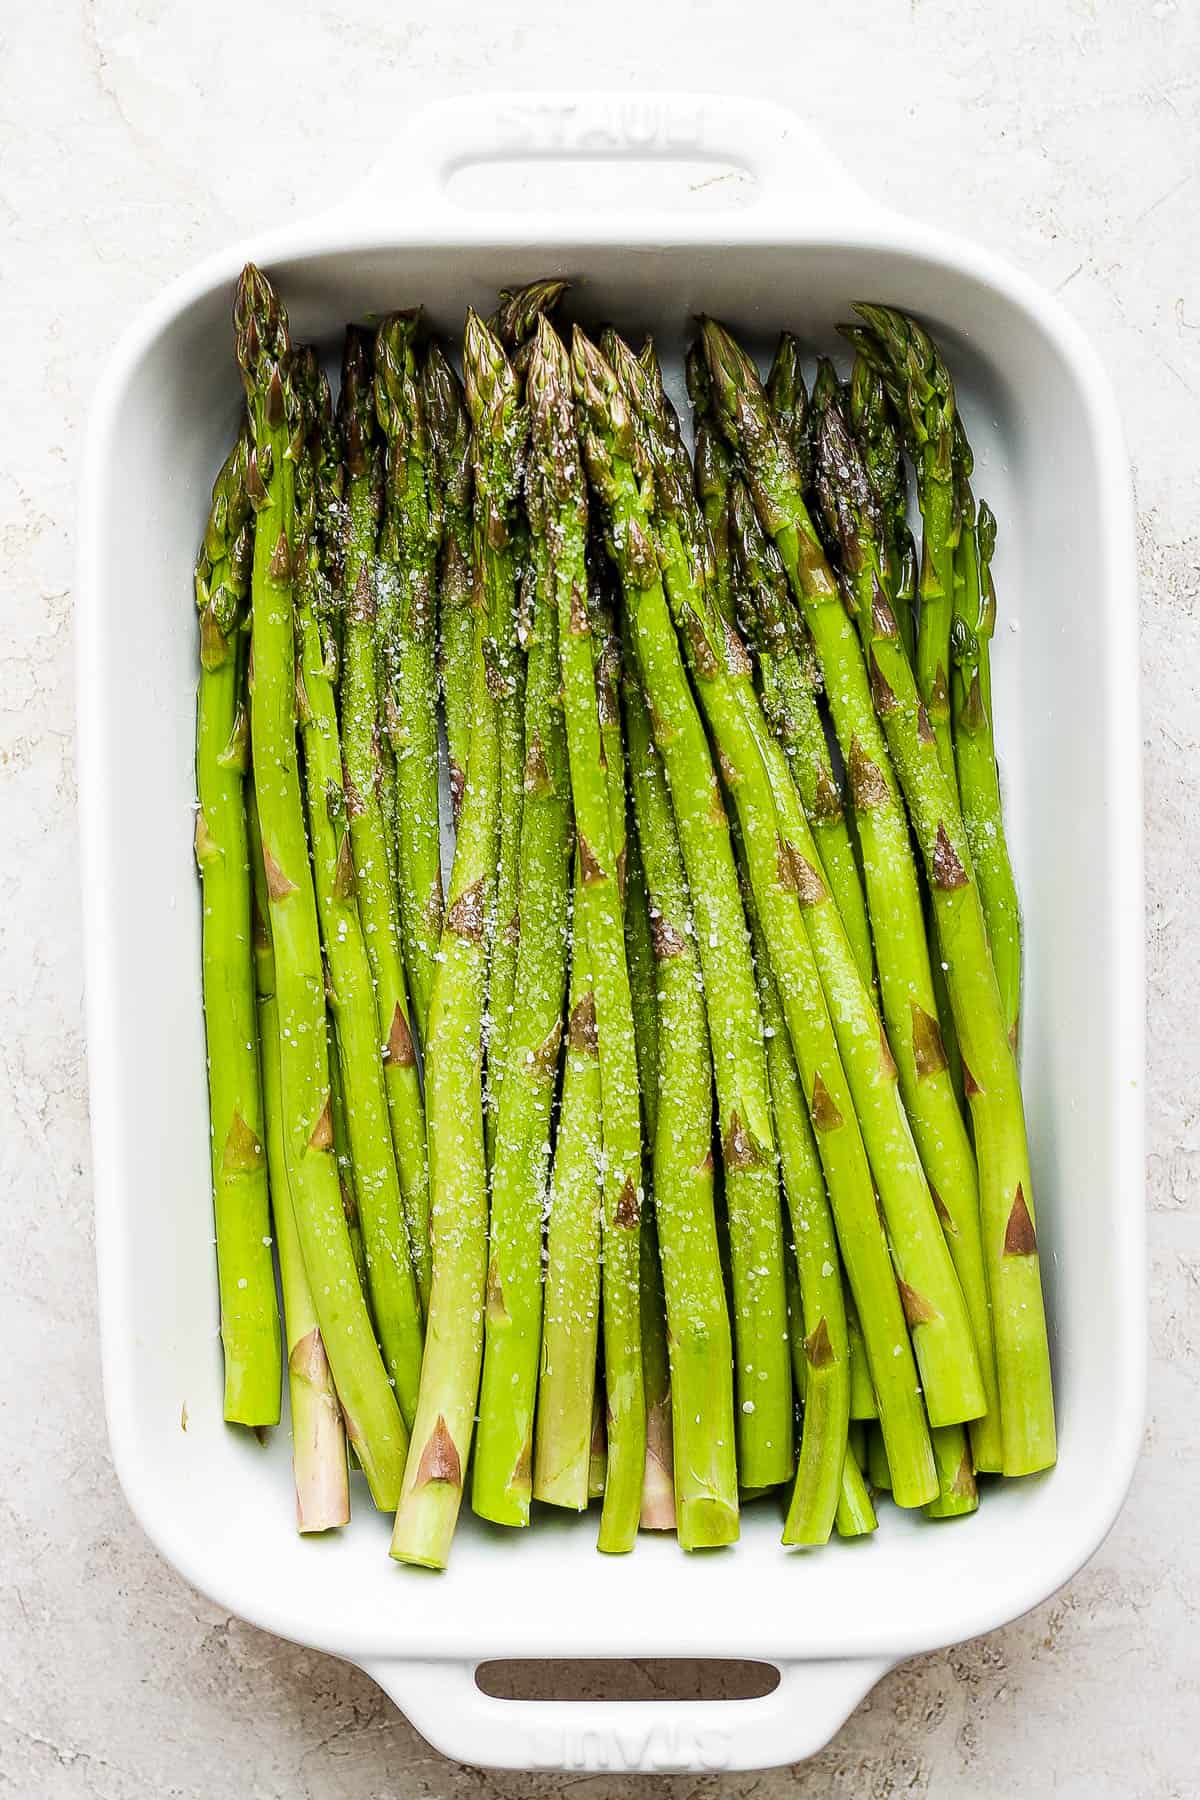 Oiled asparagus seasoned with salt and pepper in the baking dish.